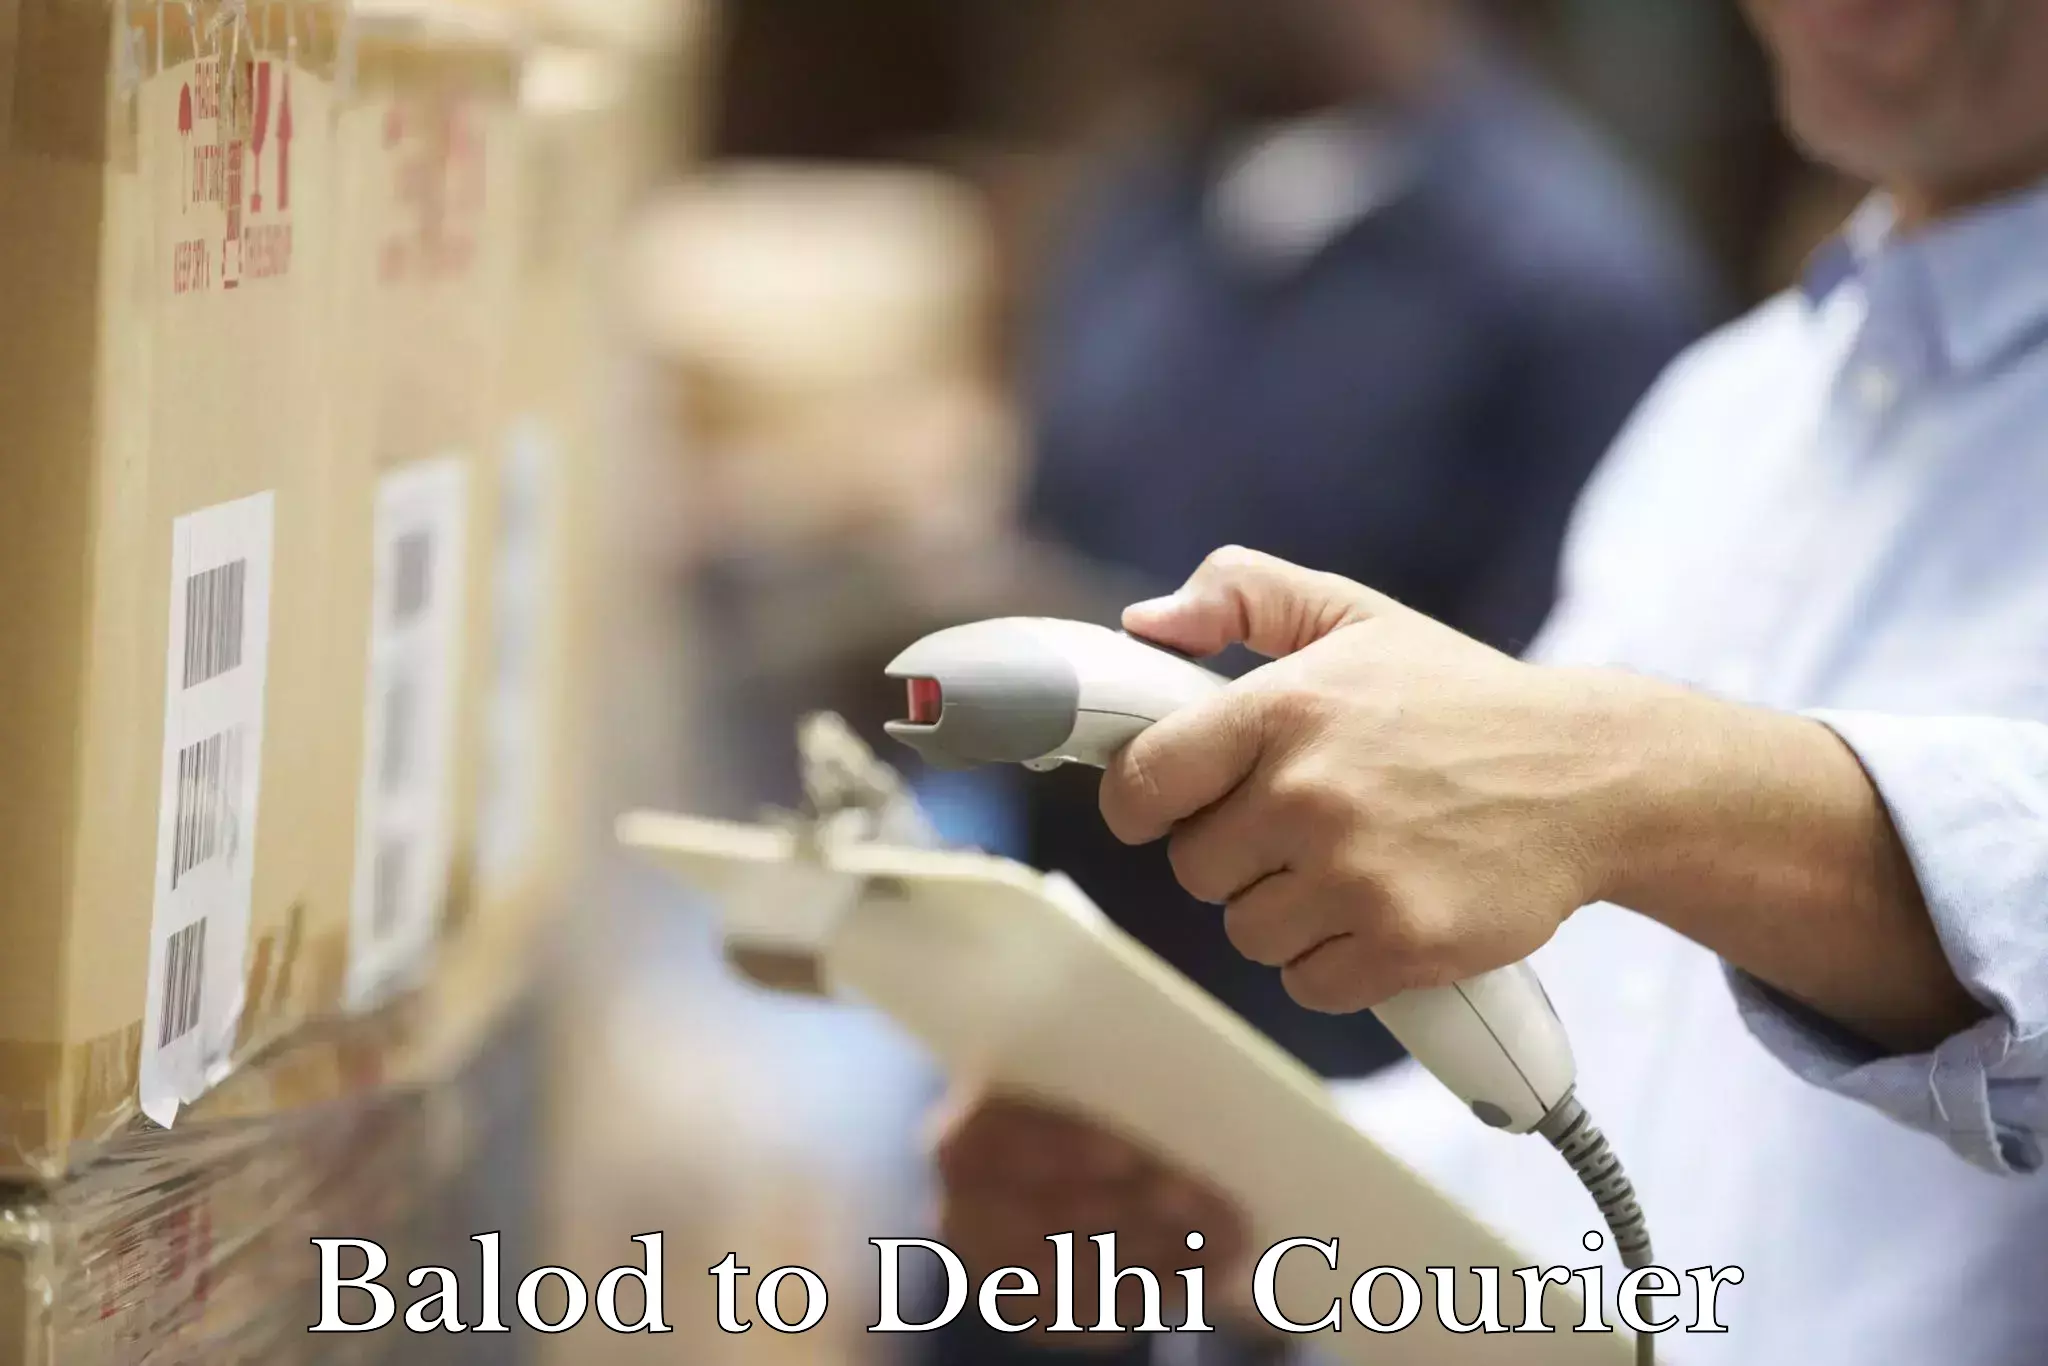 On-call courier service Balod to Delhi